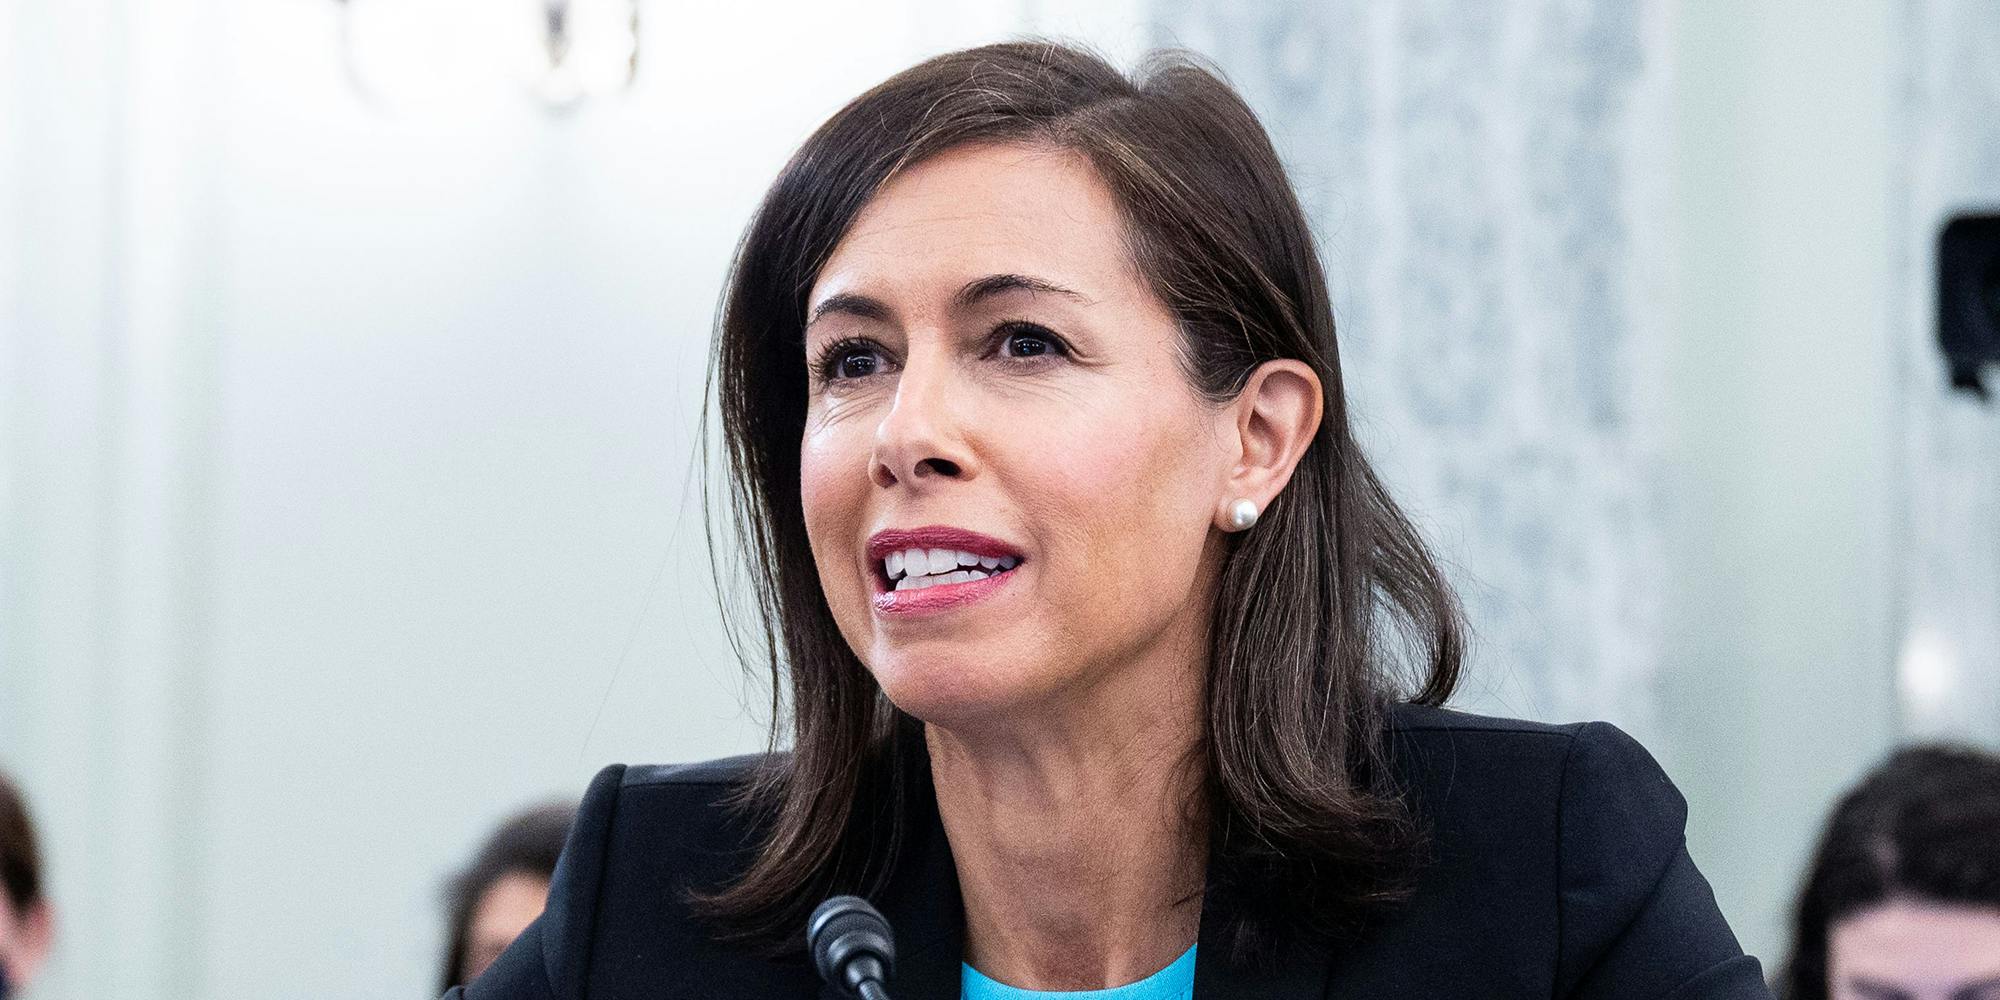 Jessica Rosenworcel, nominee to be Chair of the Federal Communications Commission (FCC), speaks at a hearing